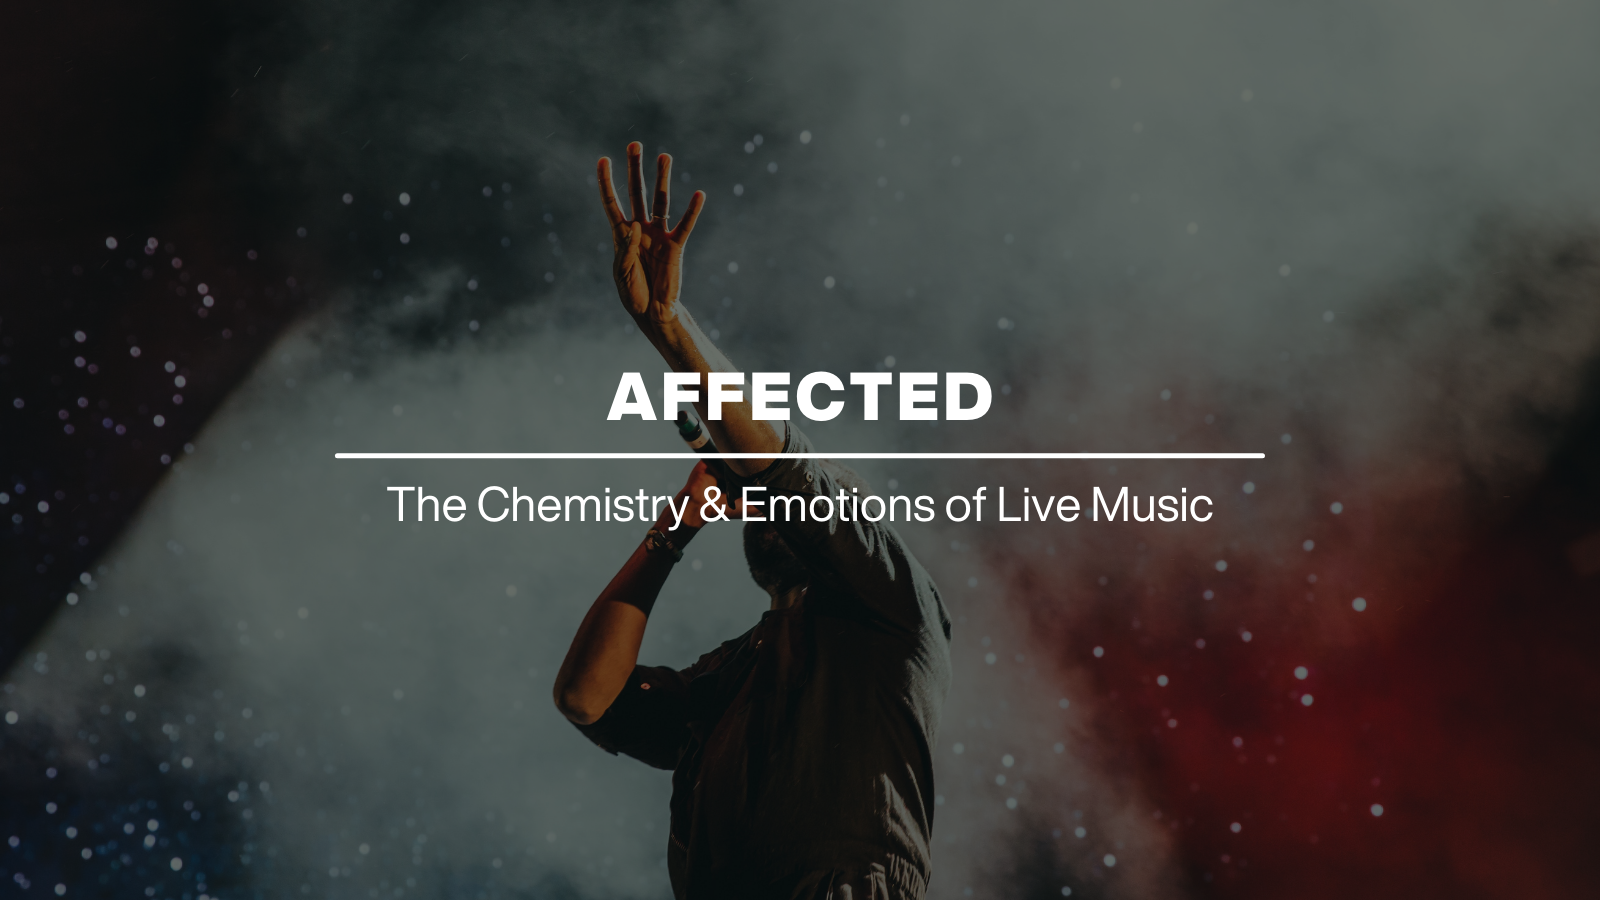 AFFECTED THE CHEMISTRY AND EMOTIONS OF LIVE MUSIC